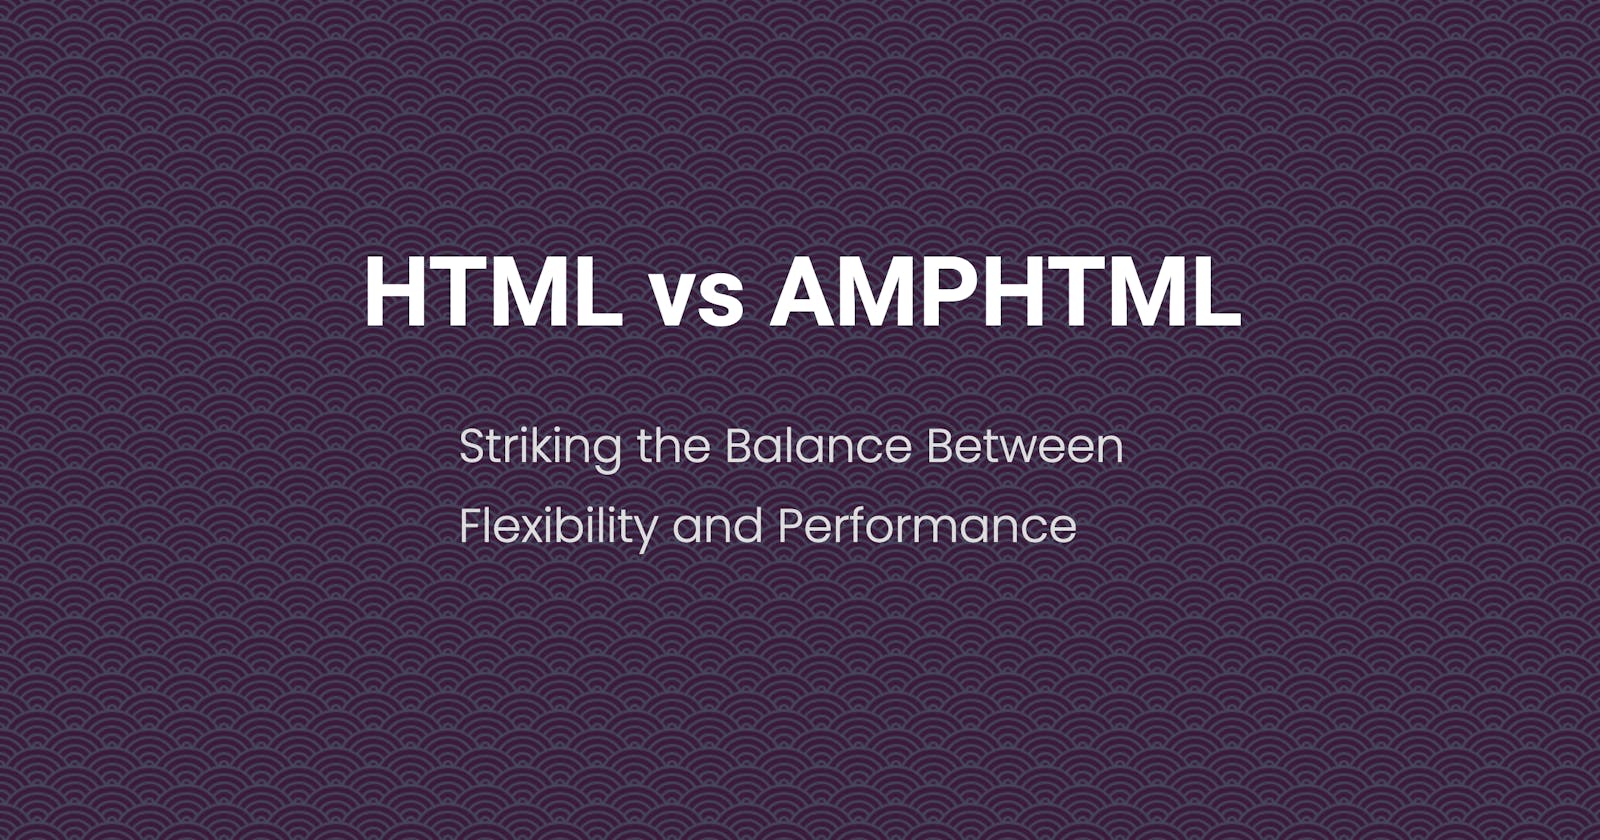 HTML vs AMPHTML: Striking the Balance Between Flexibility and Performance